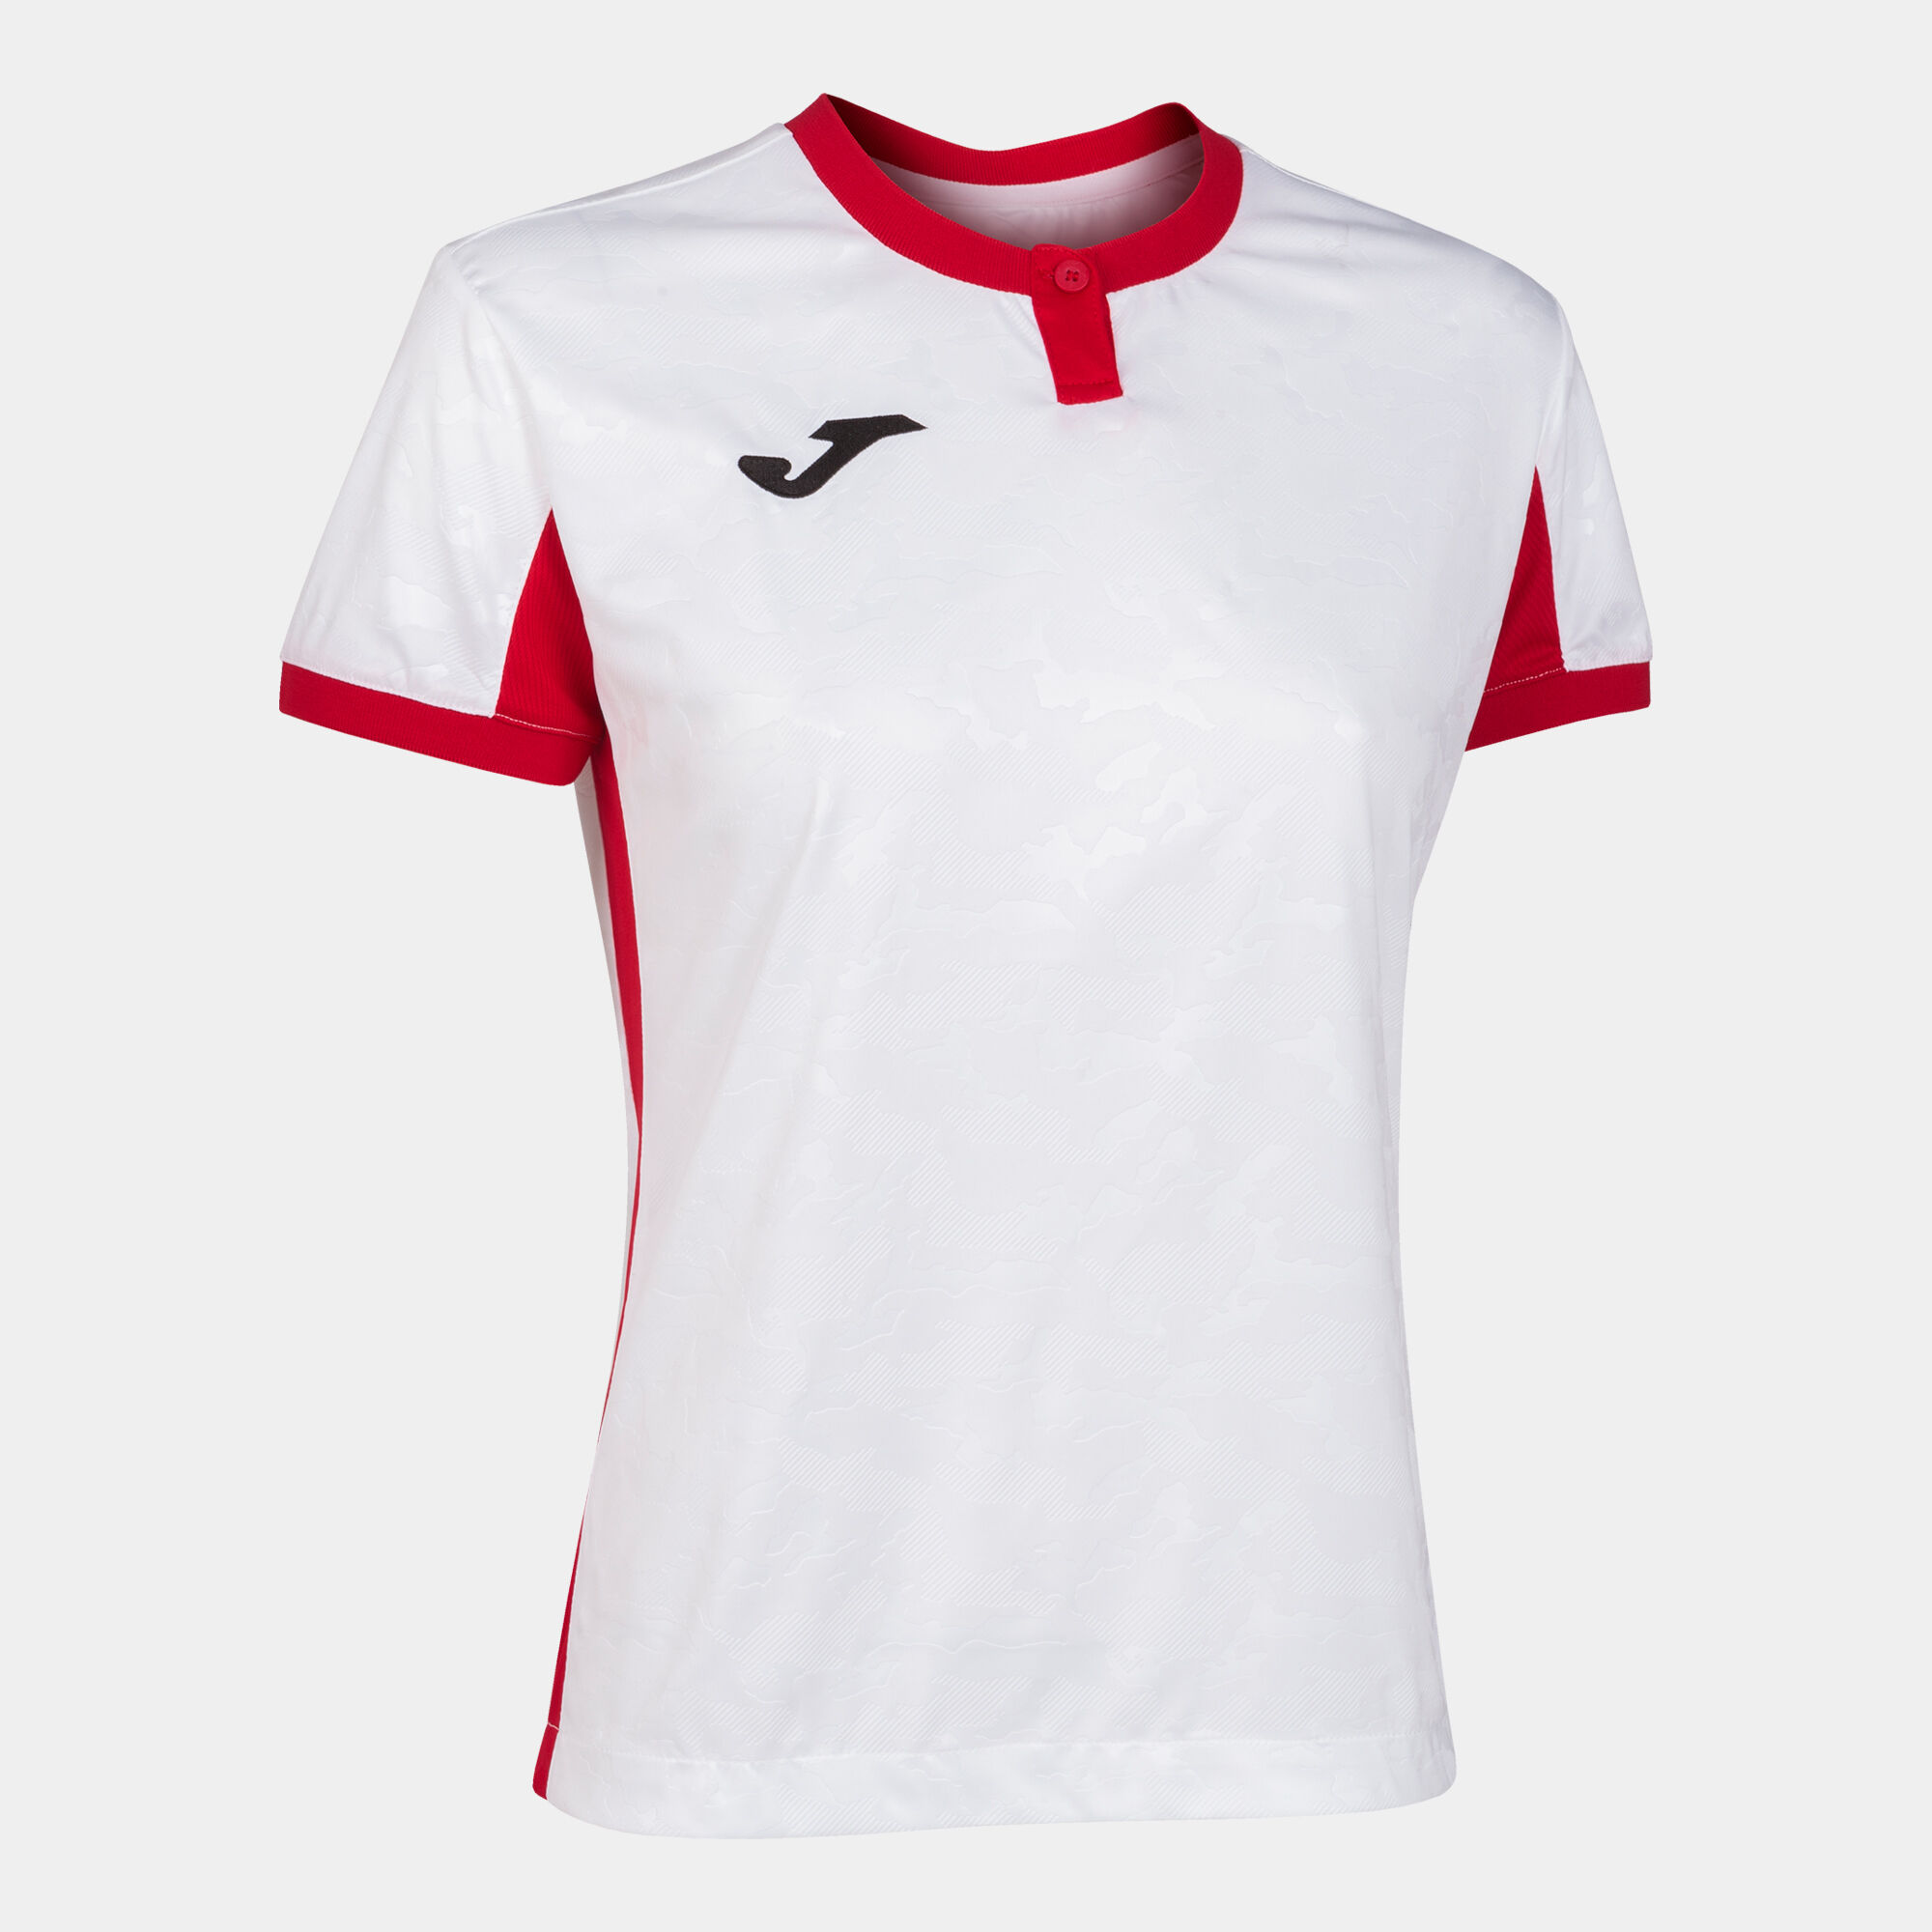 Maillot manches courtes femme Toletum II blanc rouge